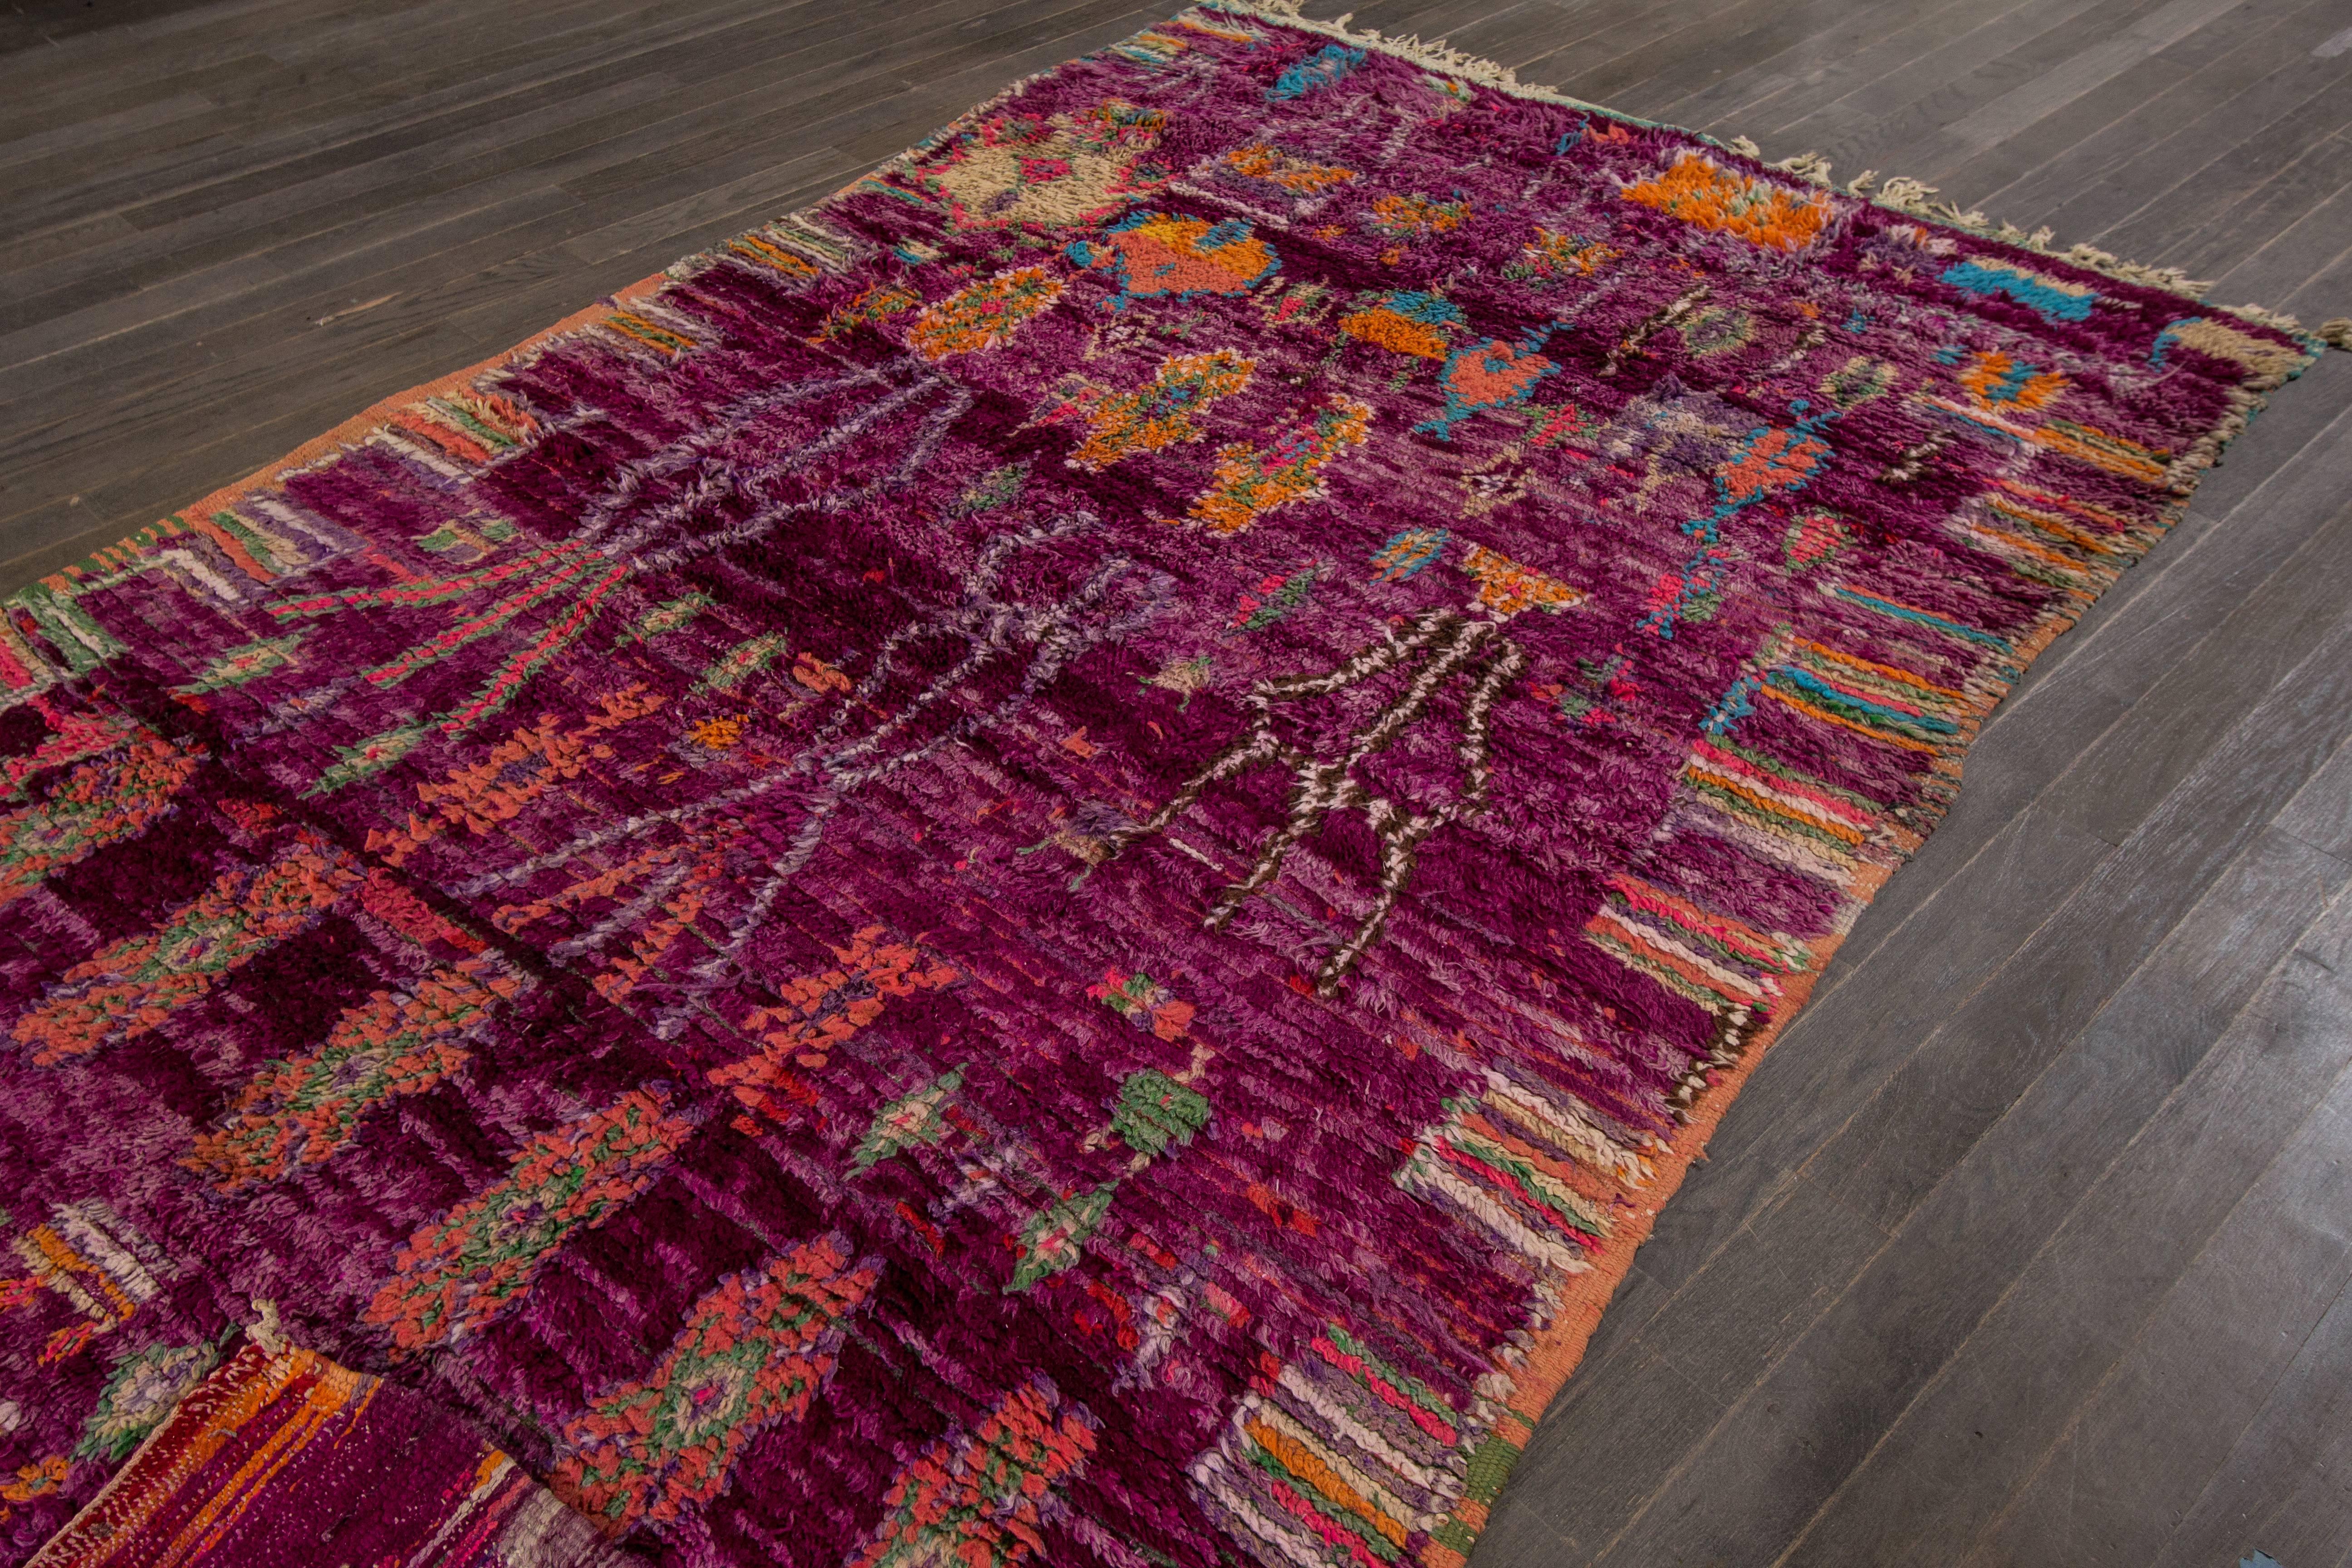 Measures: 5'.7 x 10'.2
An old Moroccan rug from the region north of Marrakech, where the Berber aesthetic of the Atlas mountains meets the Arab culture of the coastal plains. An older example with intense red ground, decorated with scattered,